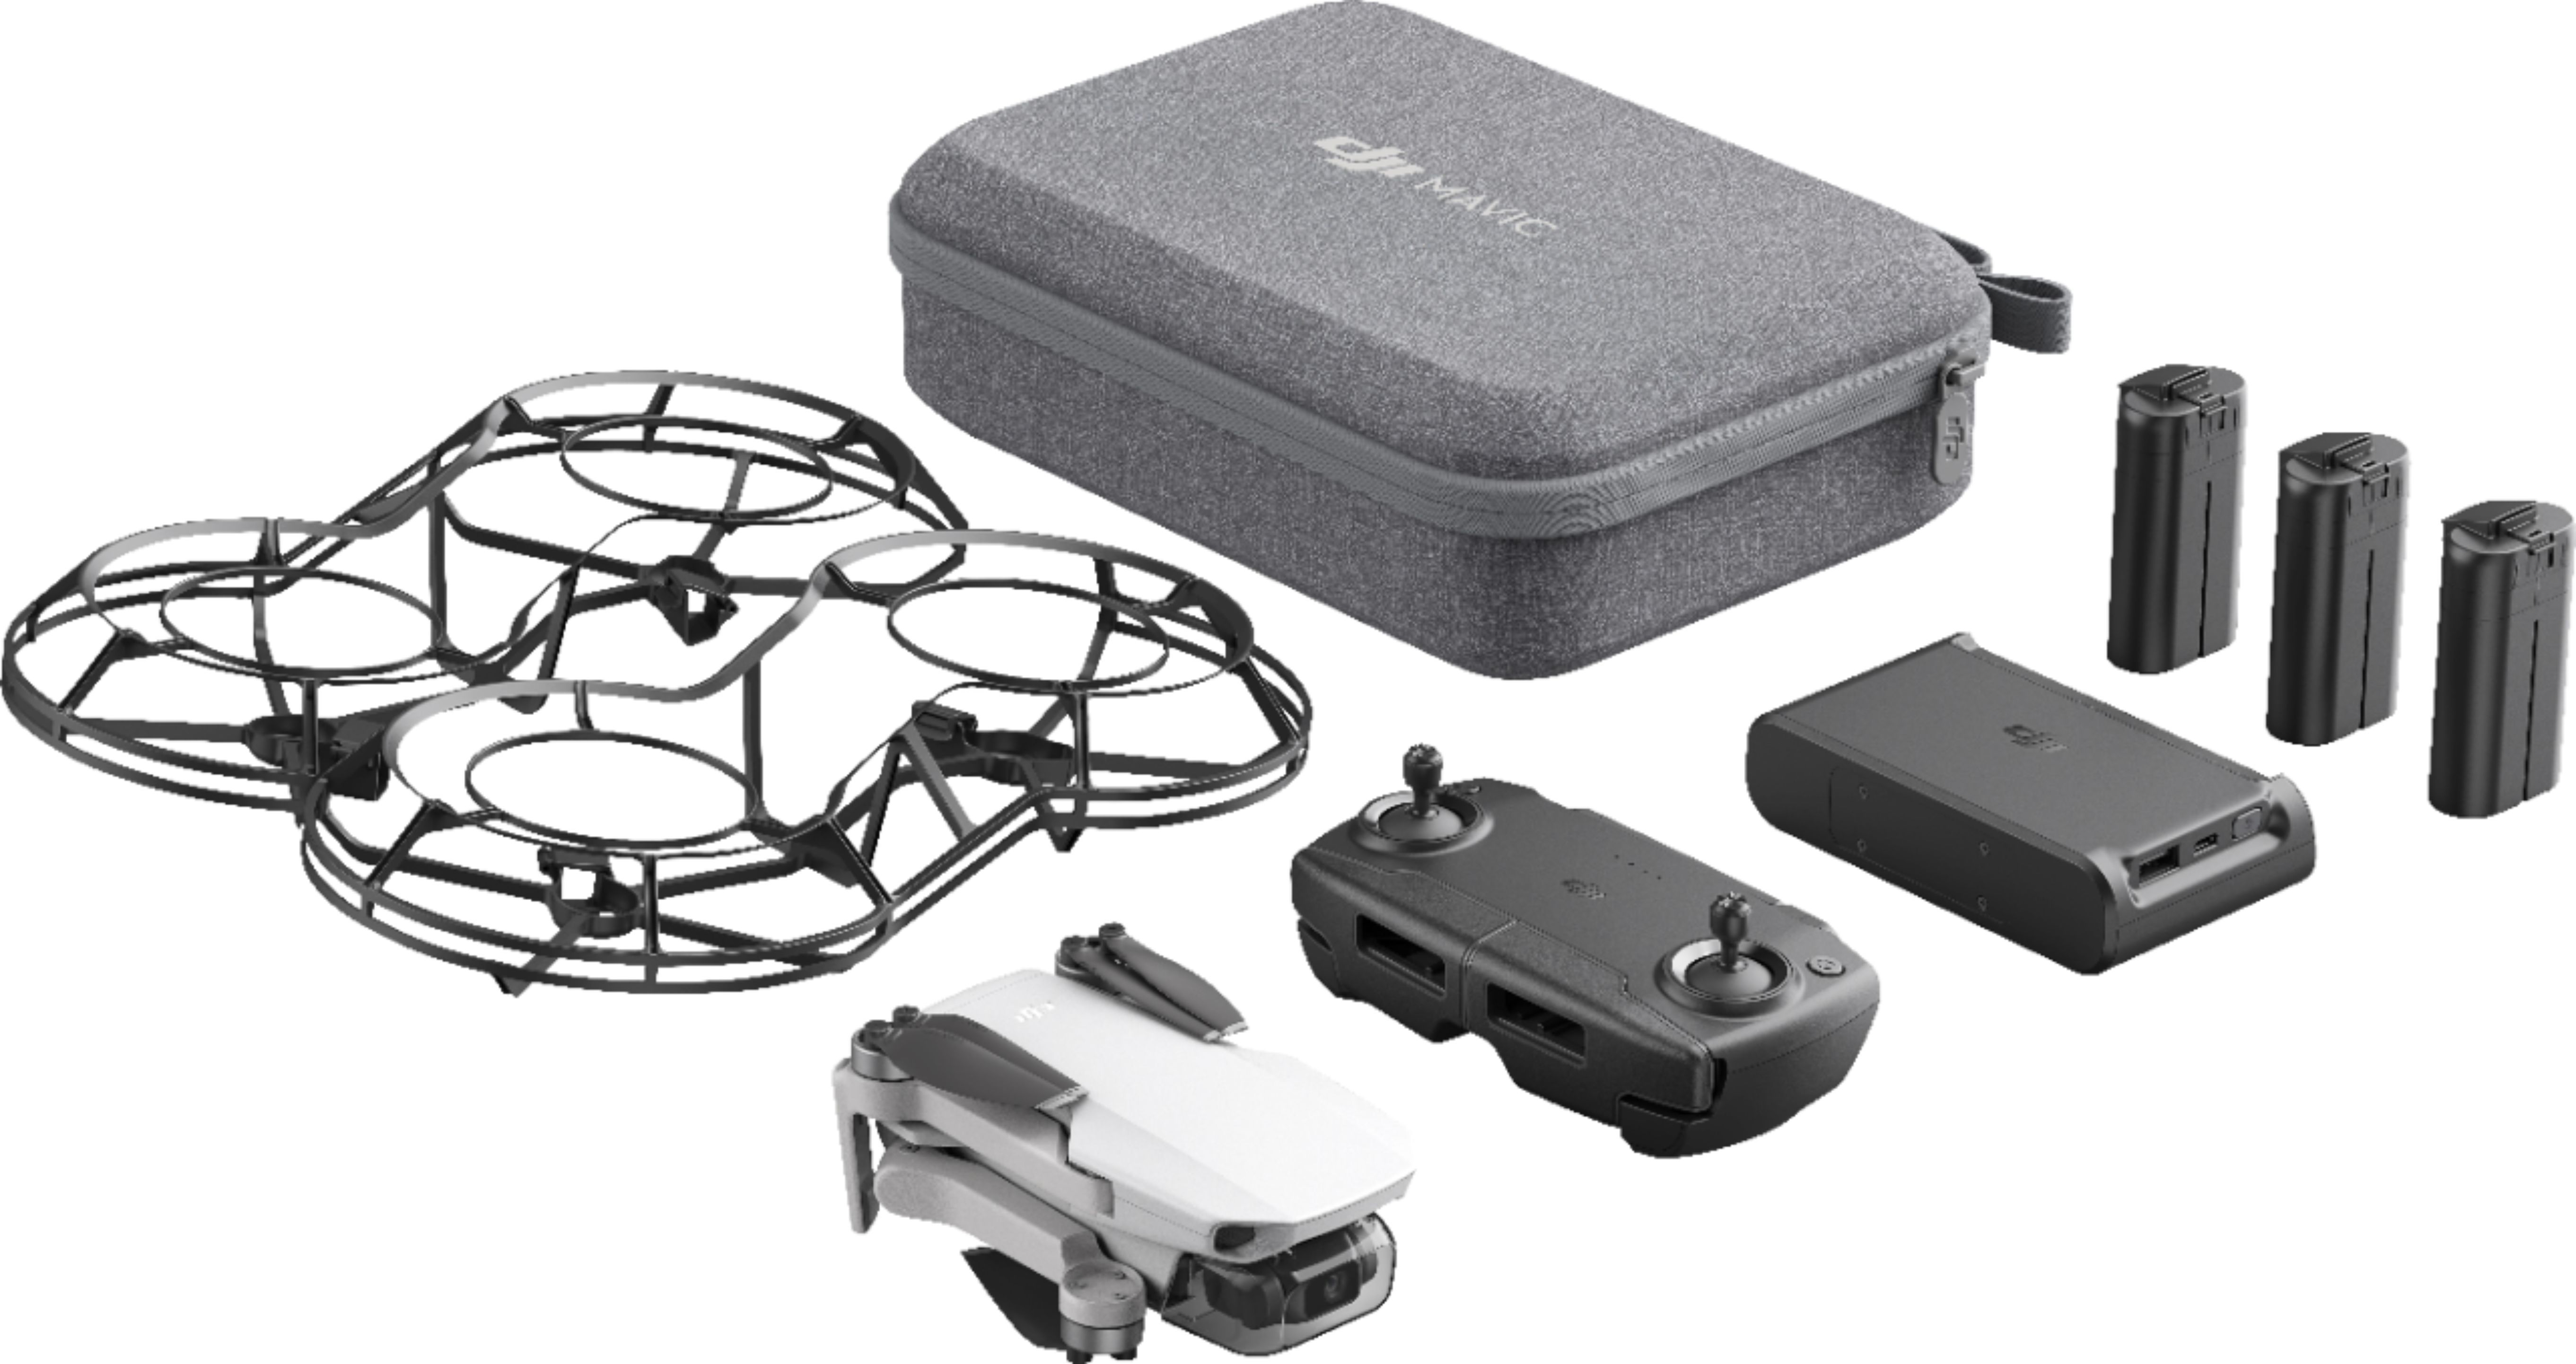 DJI Mavic Mini Fly More Combo Quadcopter with Remote Controller Gray CP.MA.00000123.01 - Best Buy | Best Buy U.S.